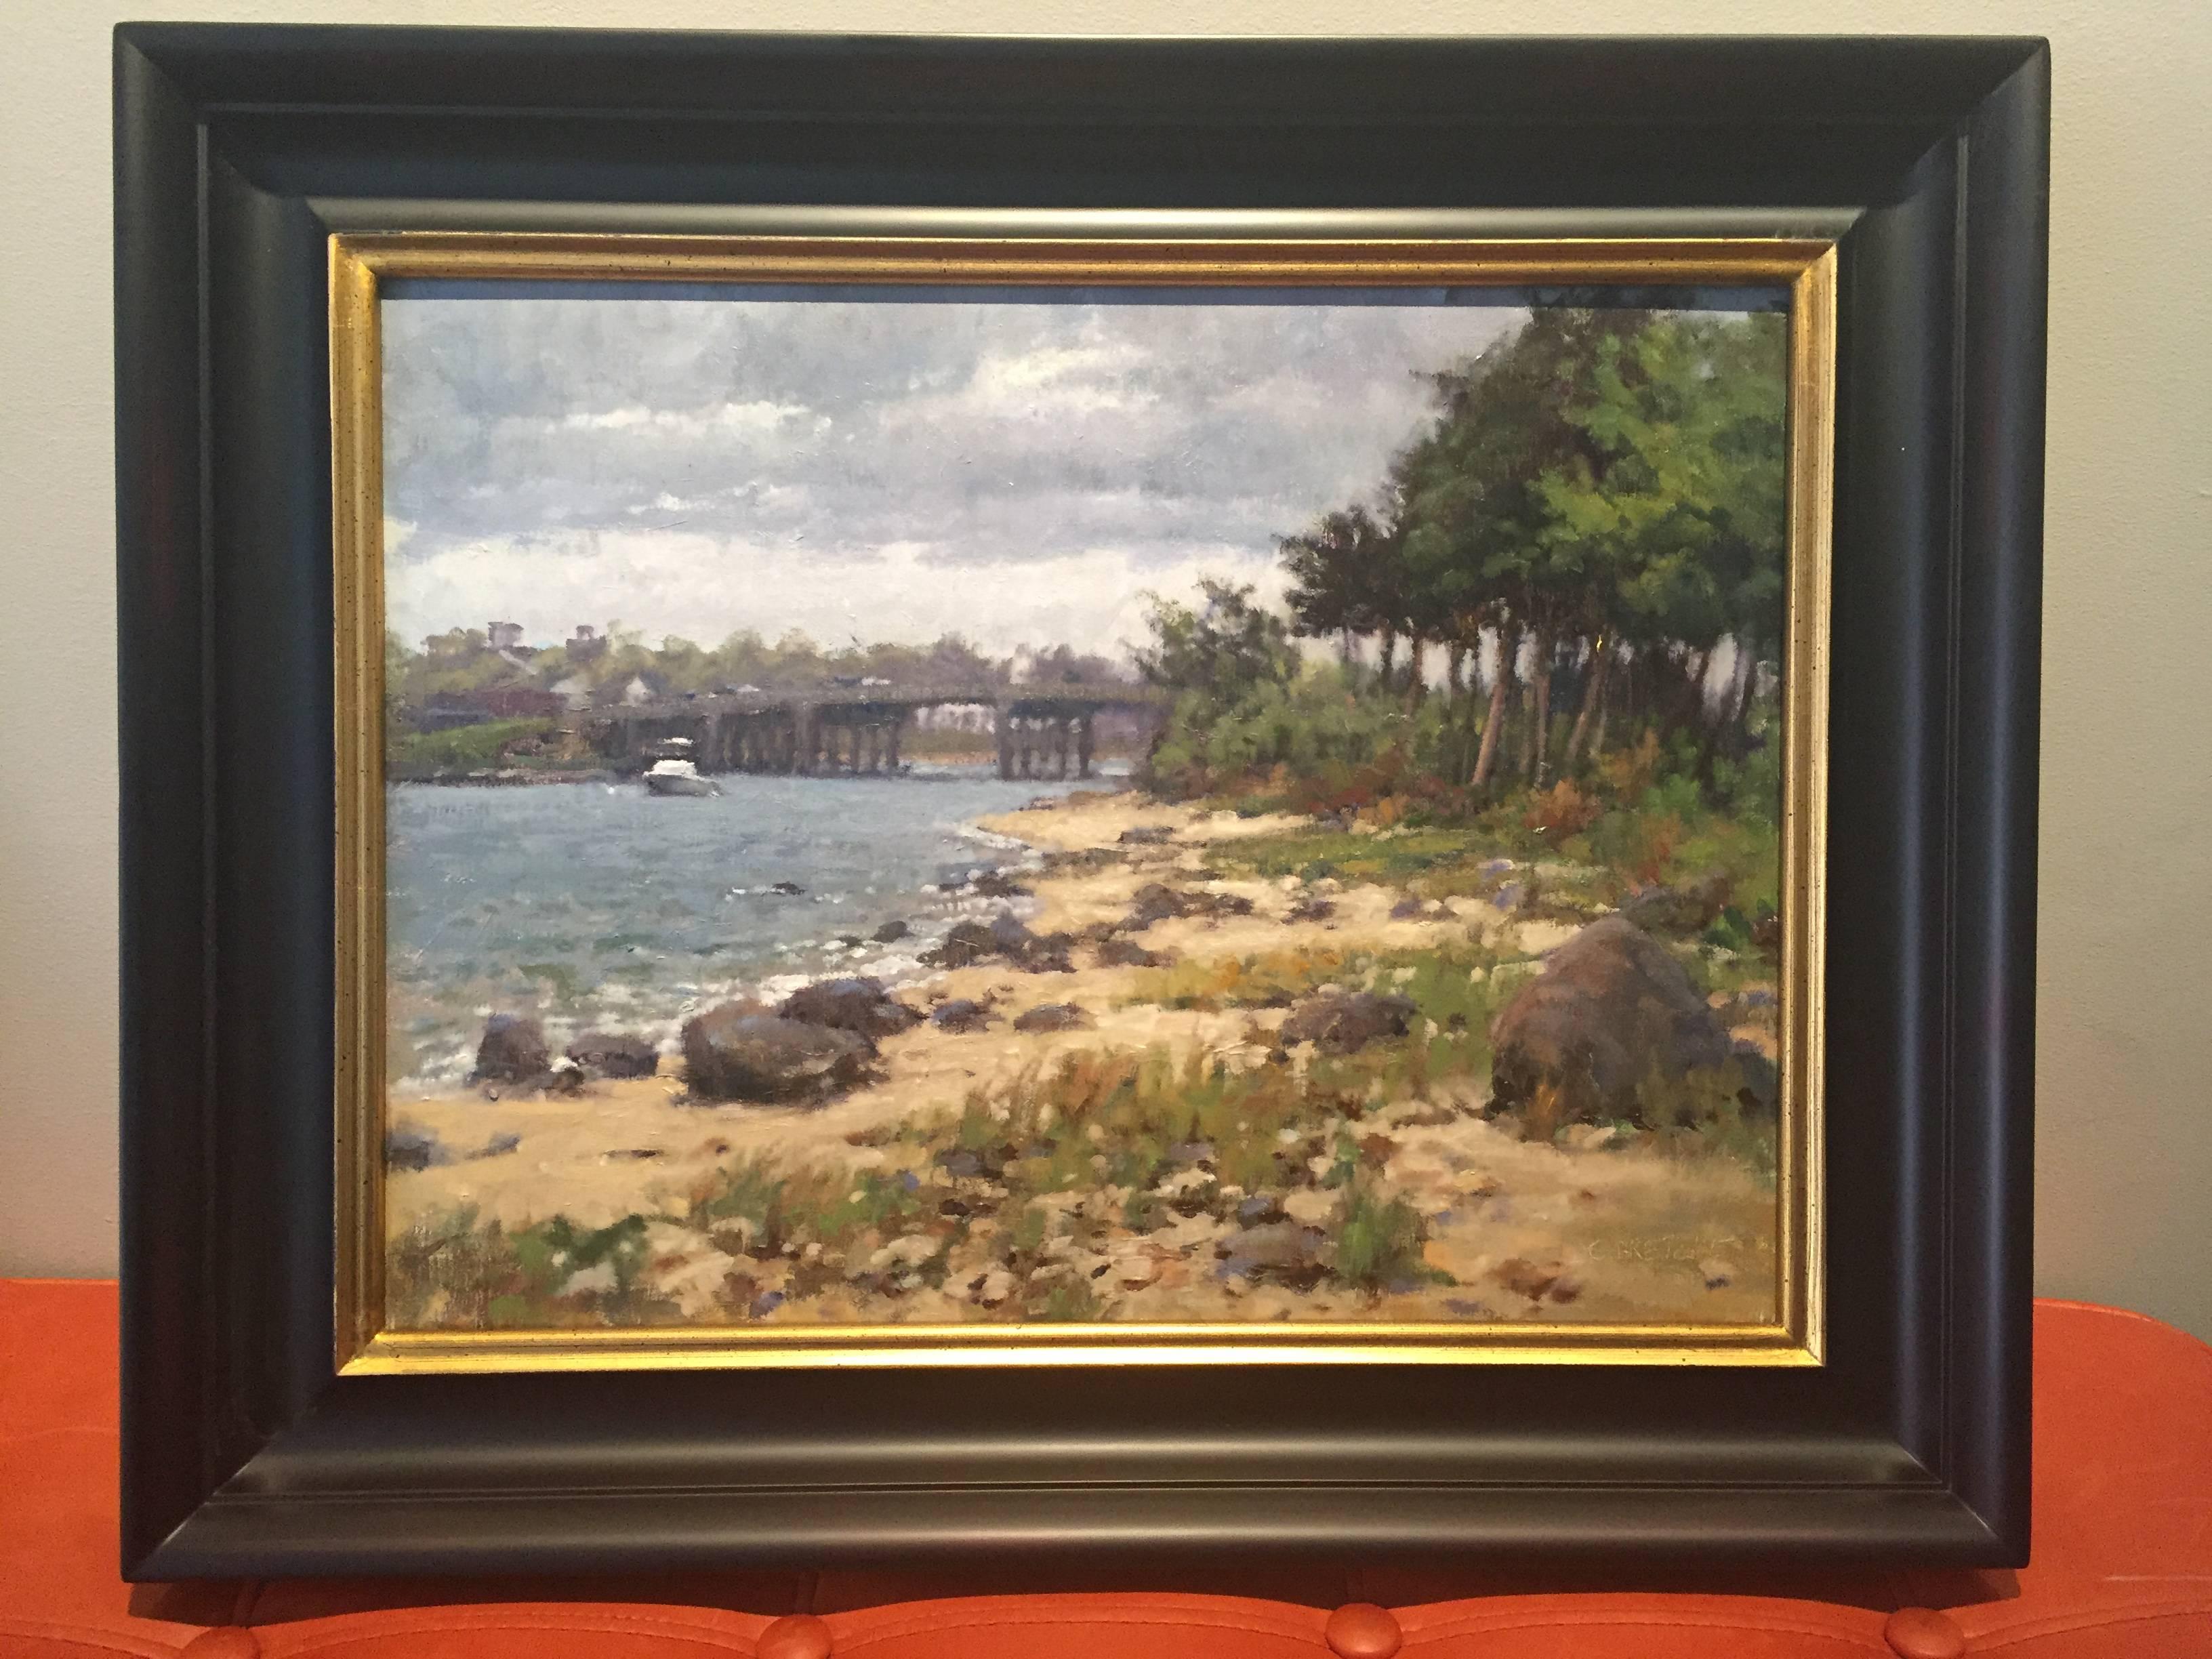 Cloudy Day, Sag Harbor - Painting by Carl Bretzke